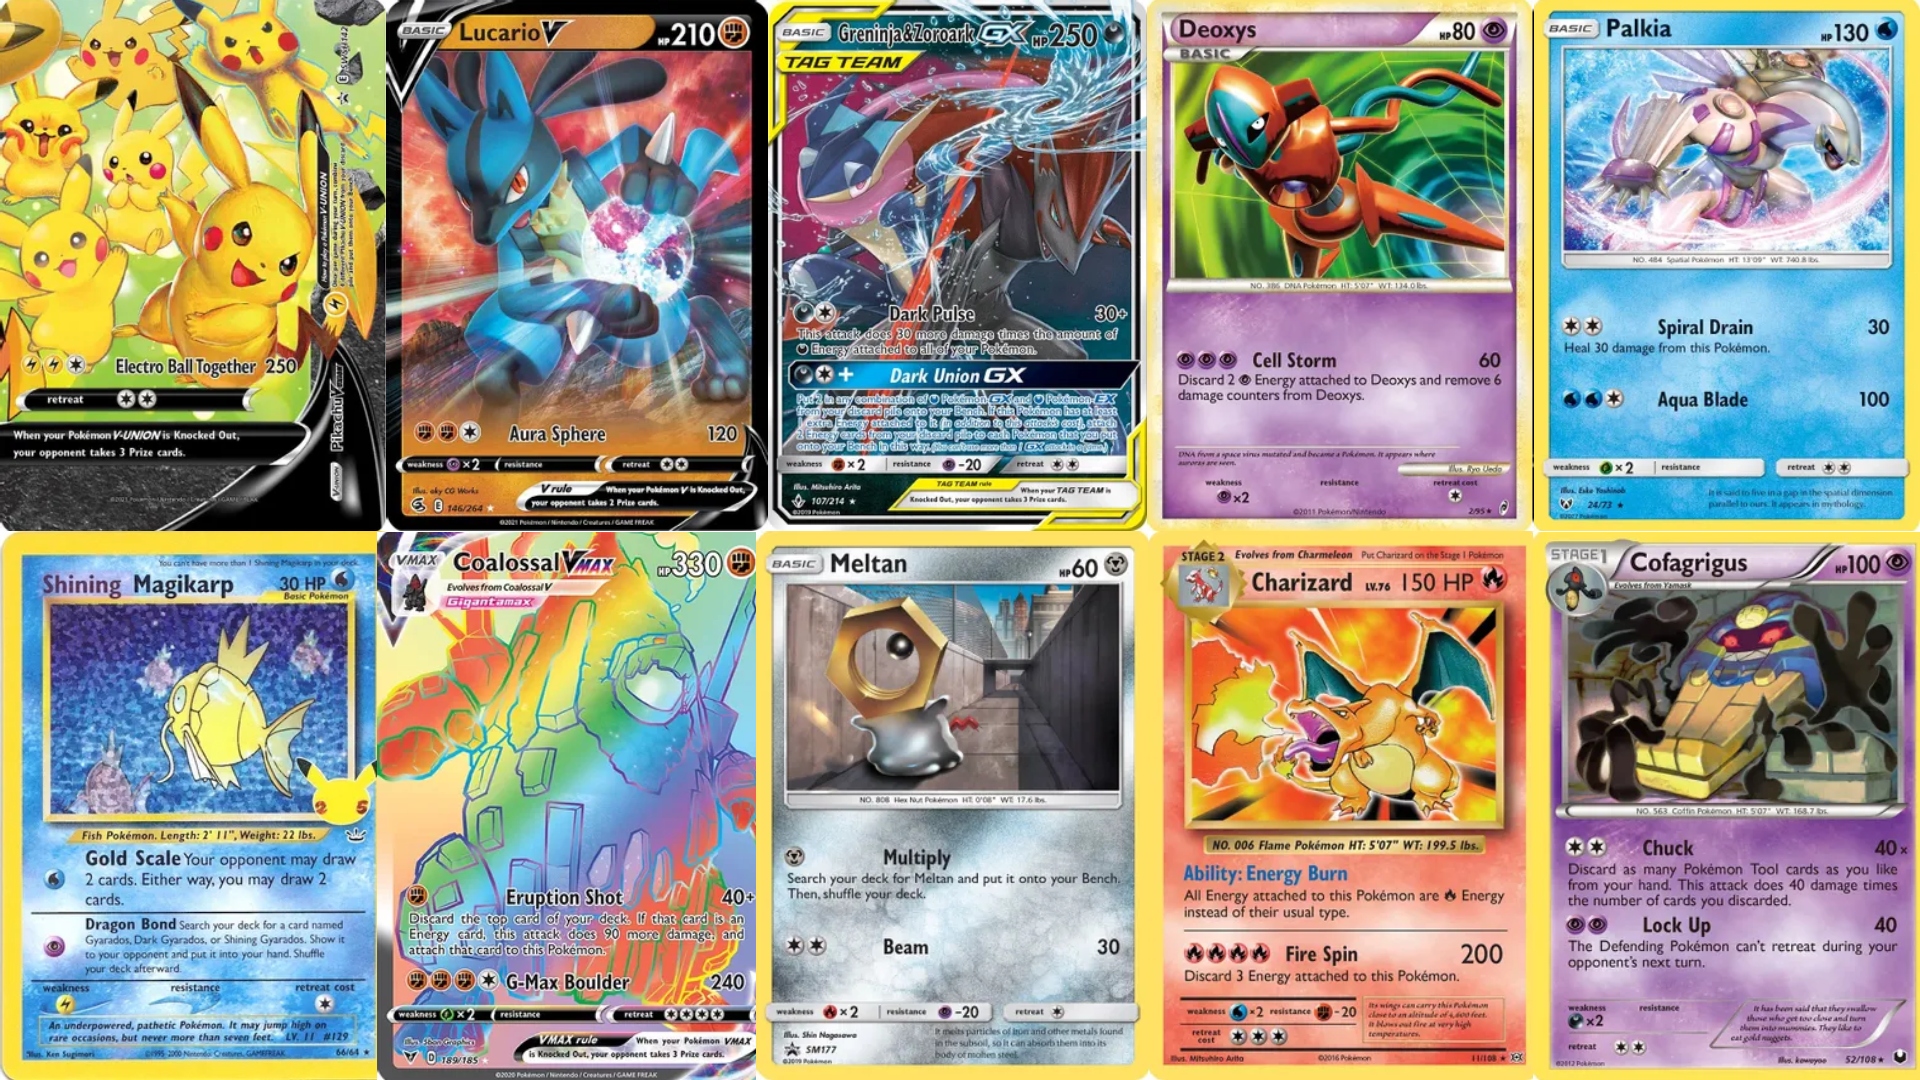 Pokémon card dispute: B.C. man order to pay more than $1,300 to buyers